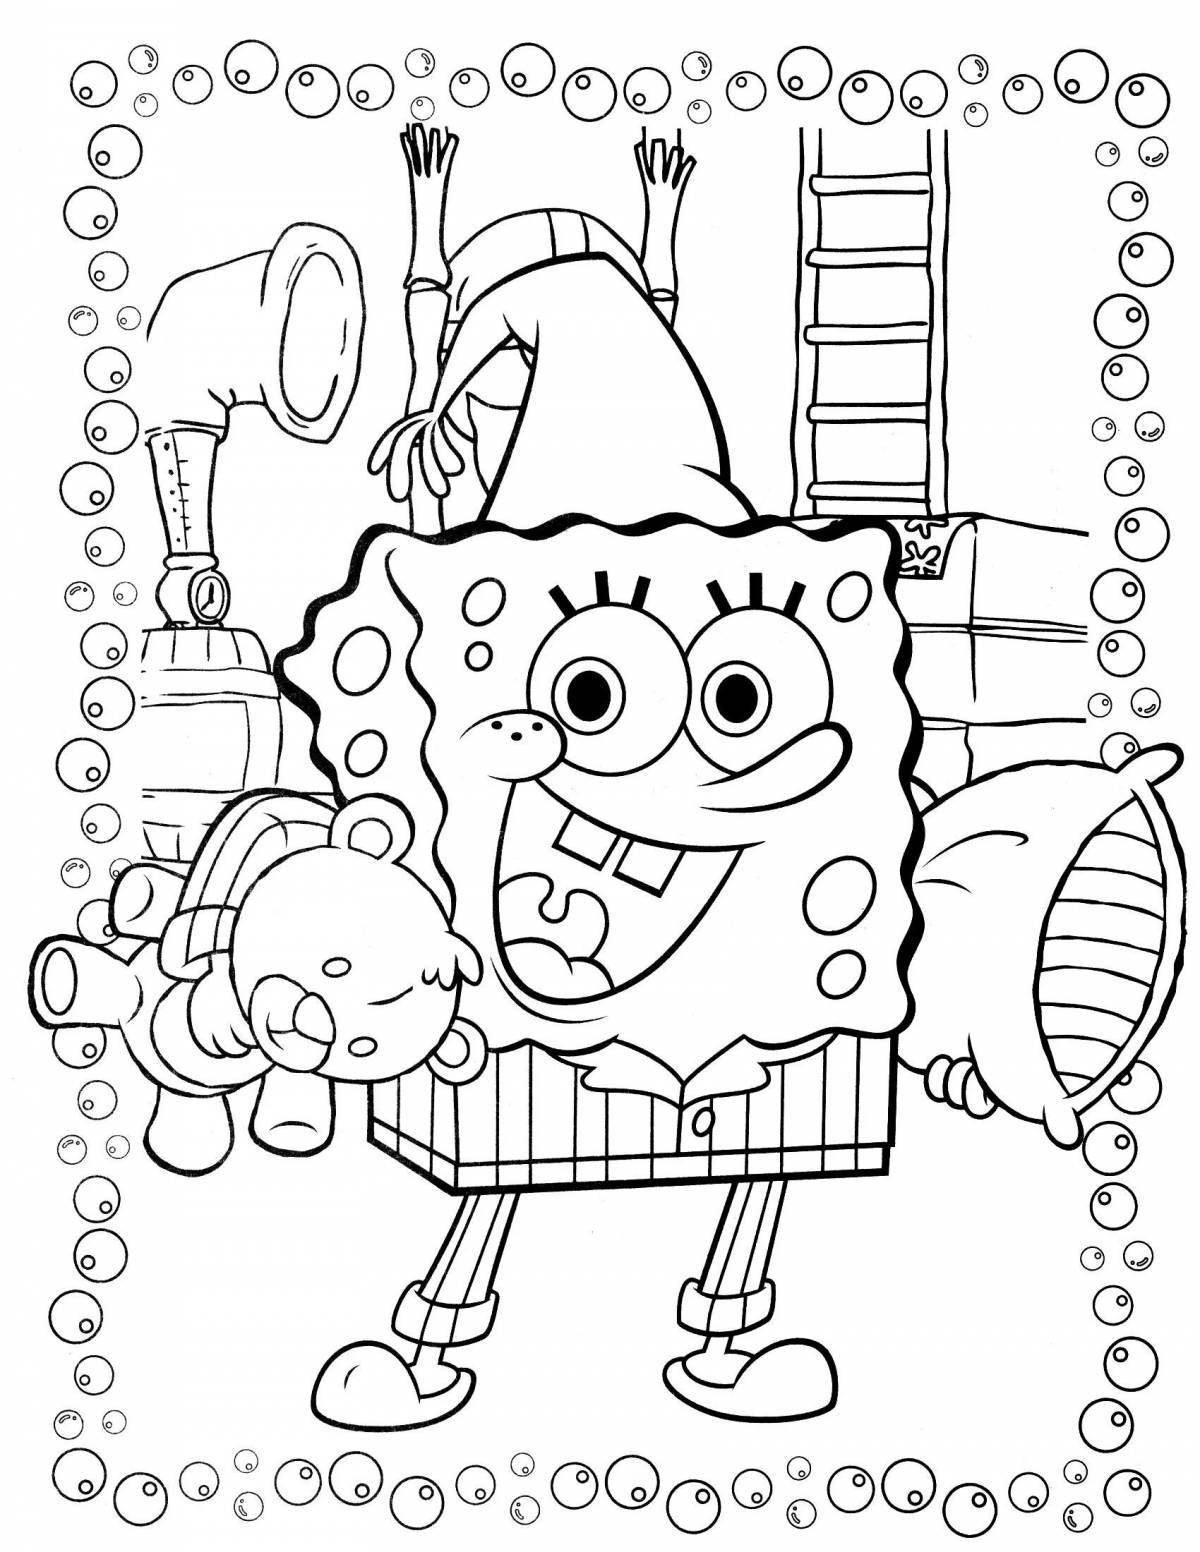 Lucky coloring page - буйный